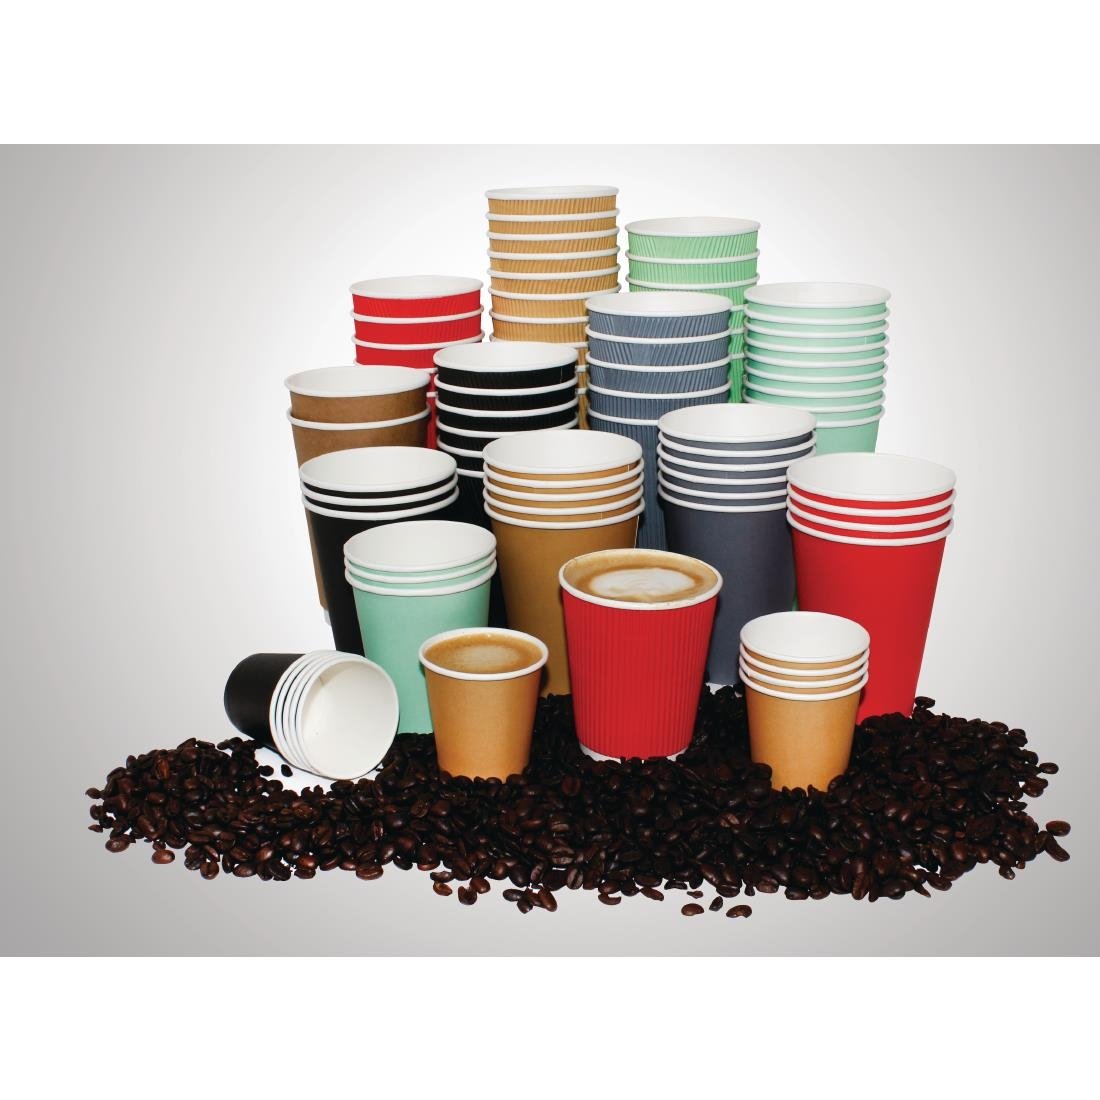 GP401 Fiesta Single Wall Takeaway Coffee Cups Turquoise 340ml / 12oz (Pack of 50) JD Catering Equipment Solutions Ltd